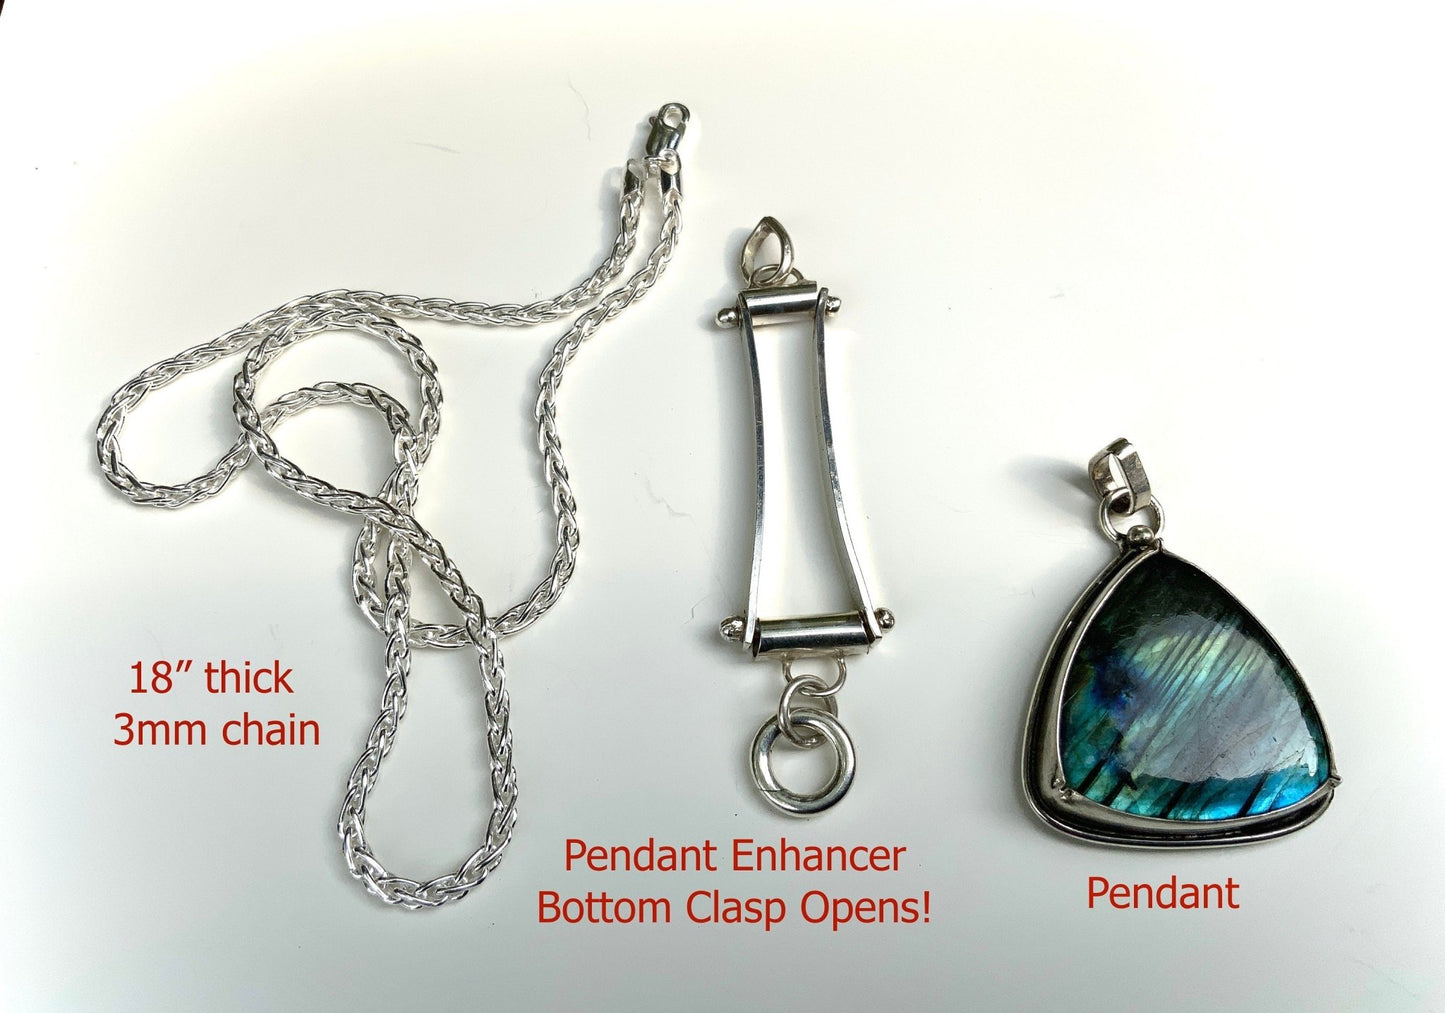 Labradorite Pendant and Enhancer on 18” Thick Sterling Silver Chain. - Evitts Creek Arts